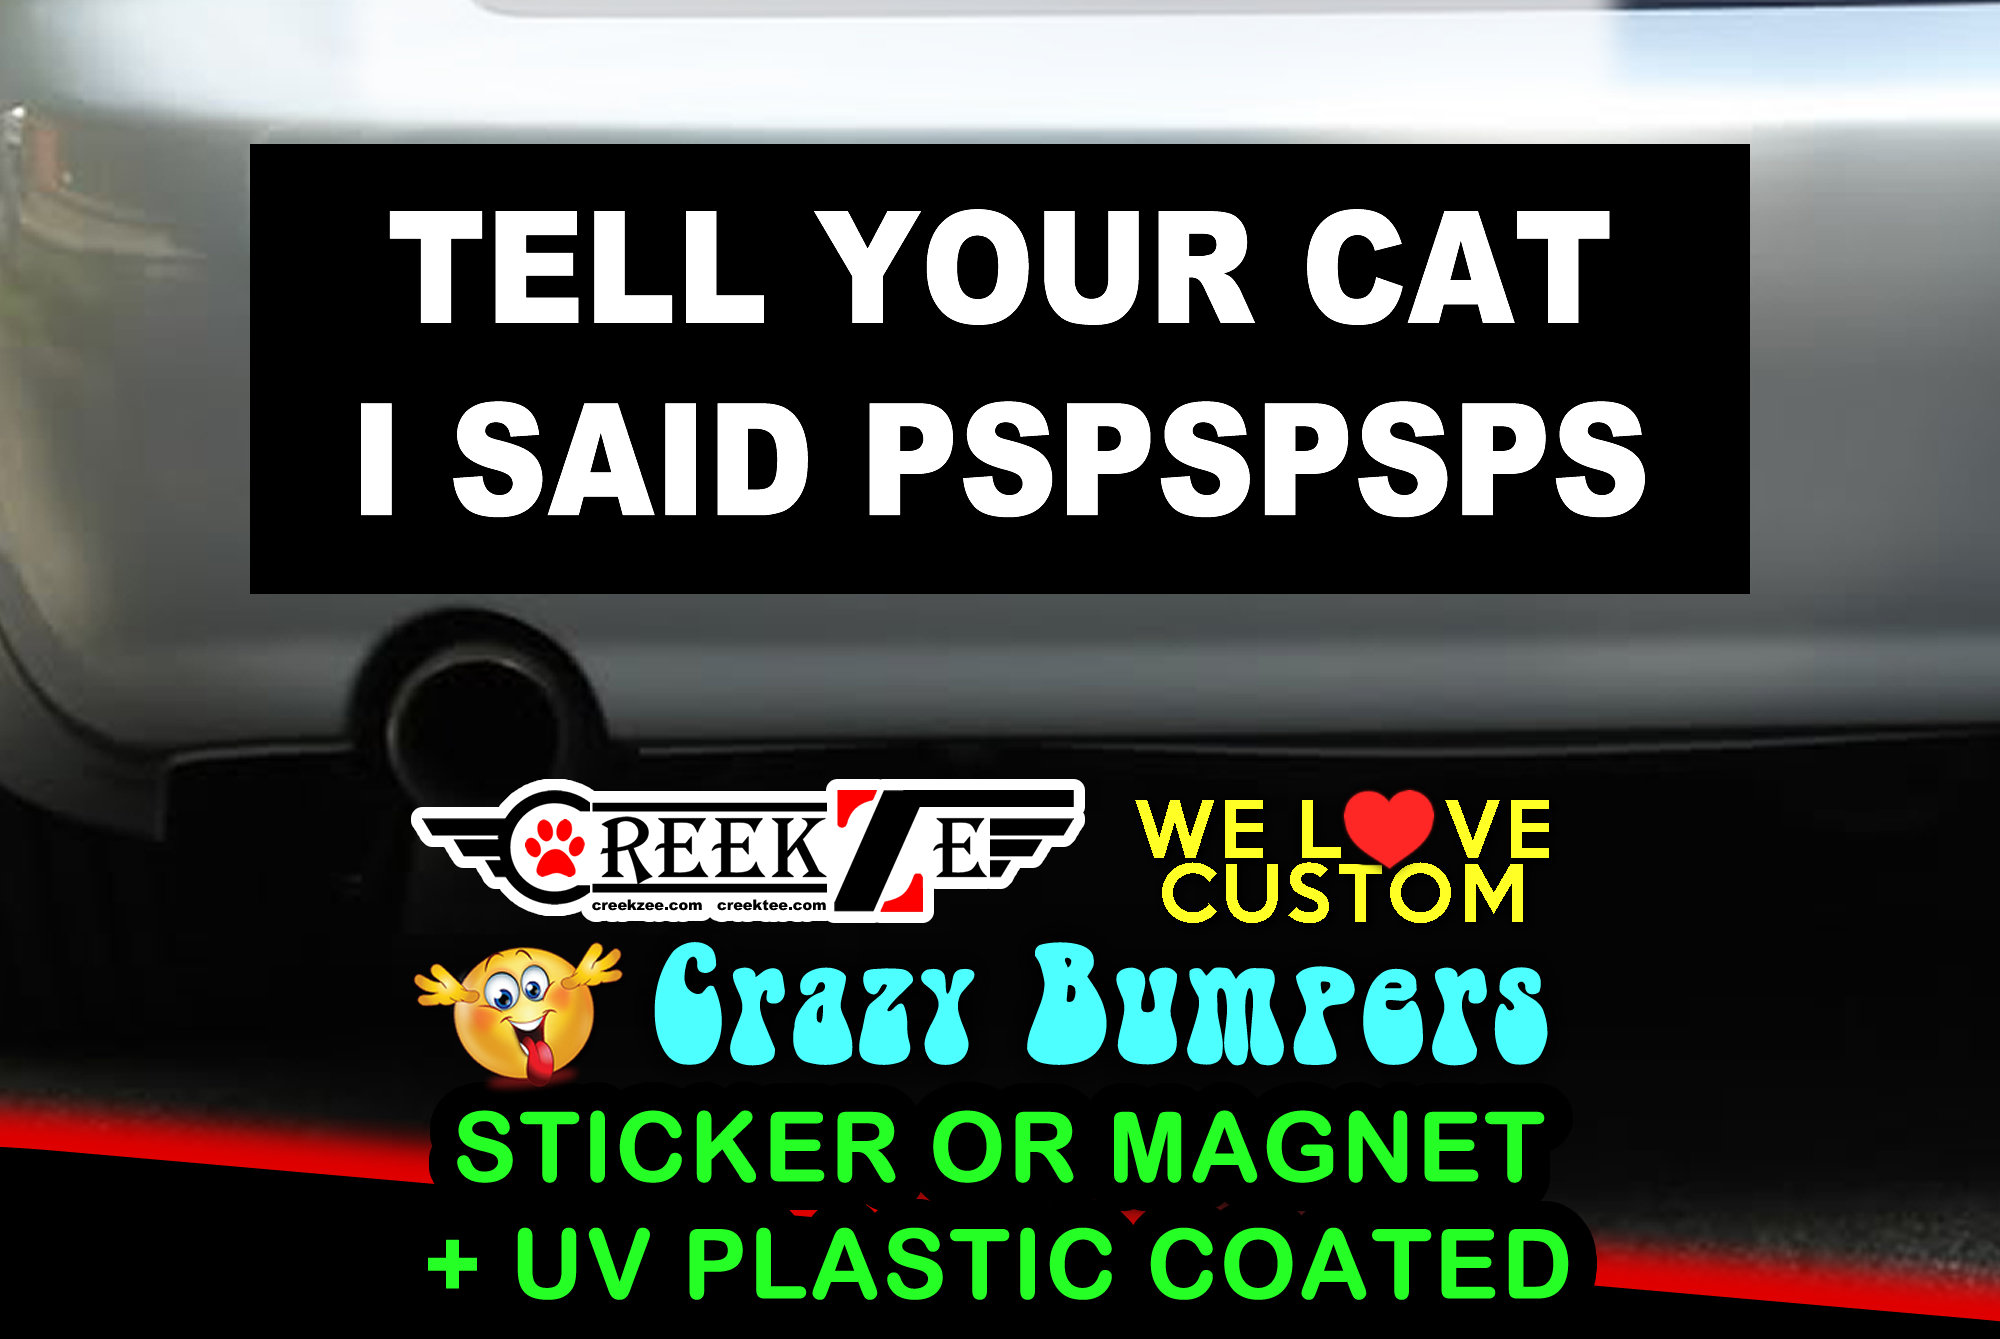 Overstock - Tell your cat i said pspspsps Funny Bumper Sticker or Magnet sizes 9